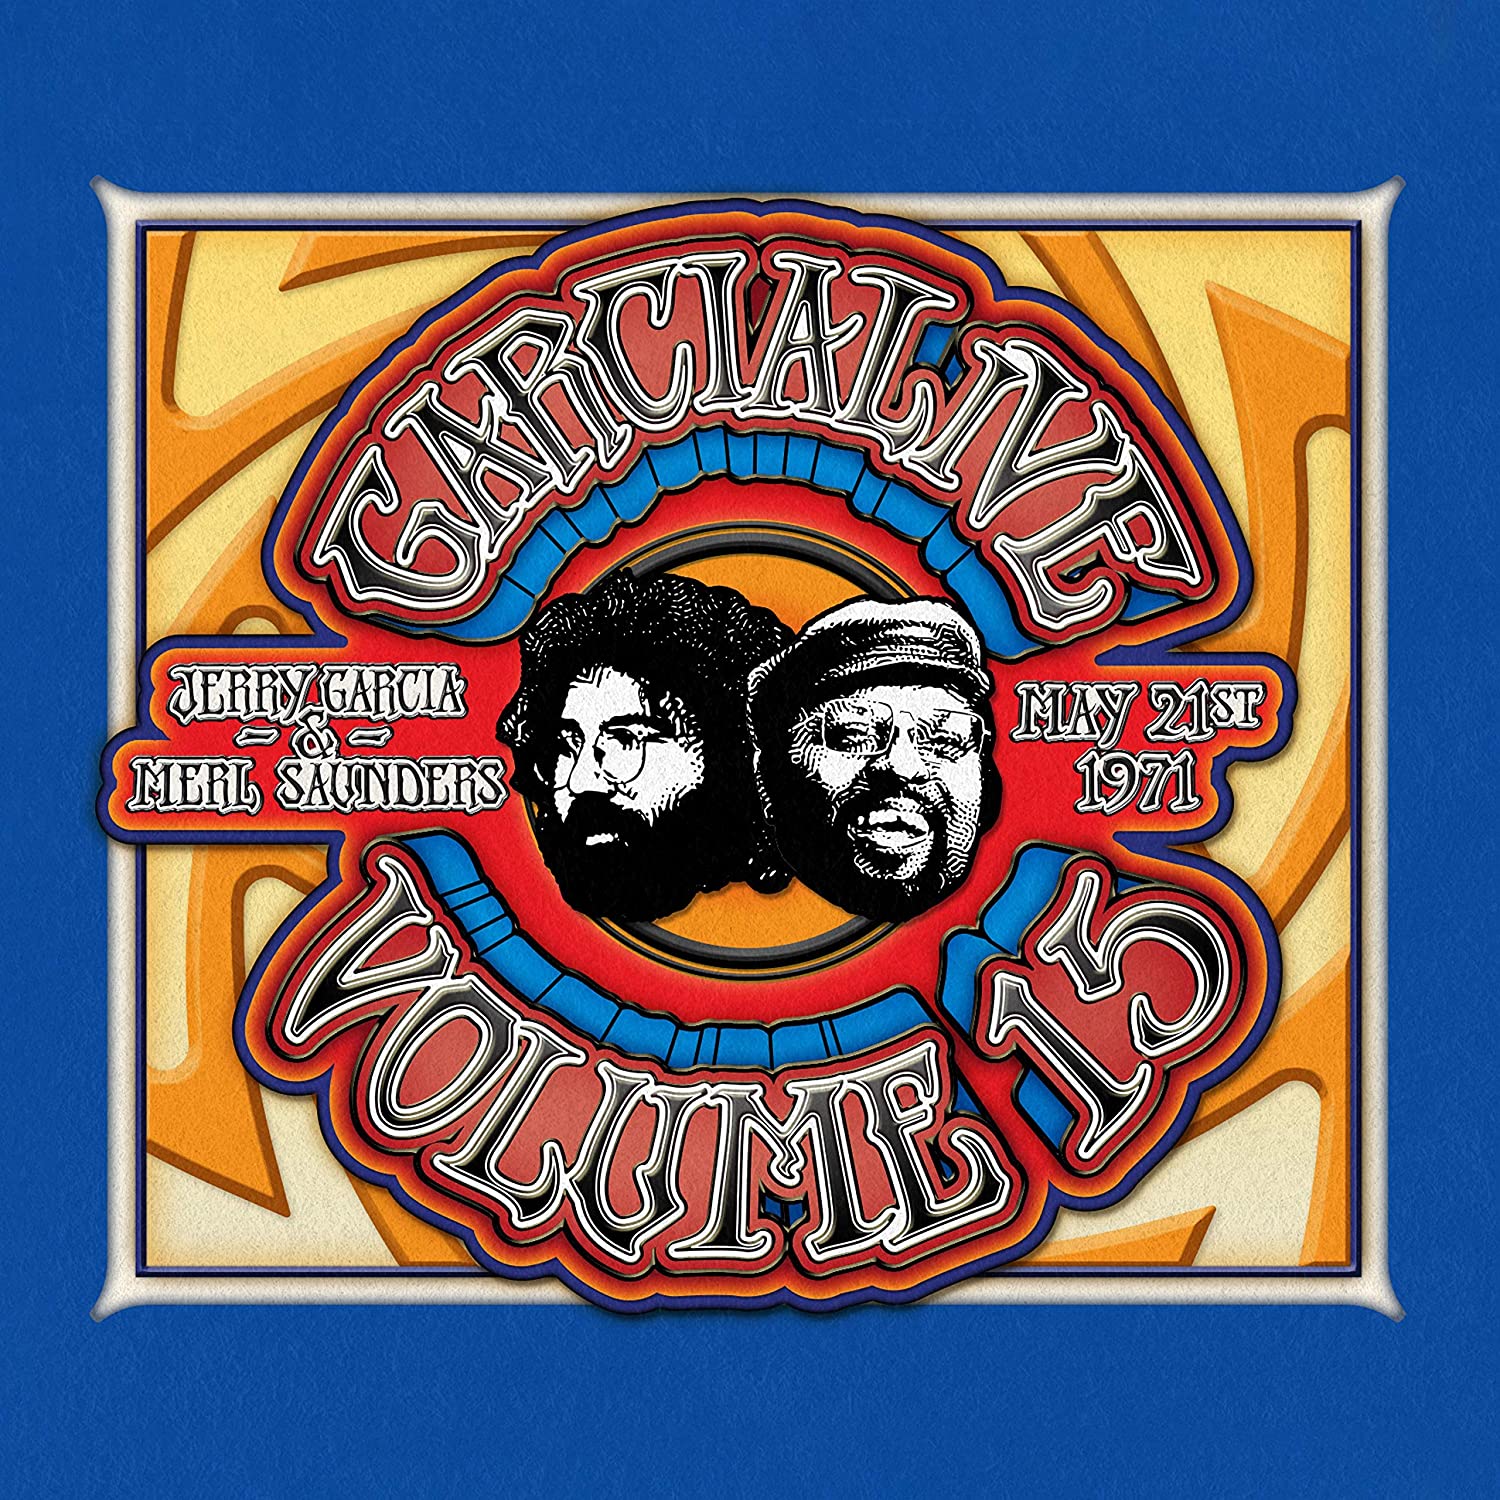 GarciaLive Vol. 15: Jerry Garcia & Merl Saunders, May 21st, 1971